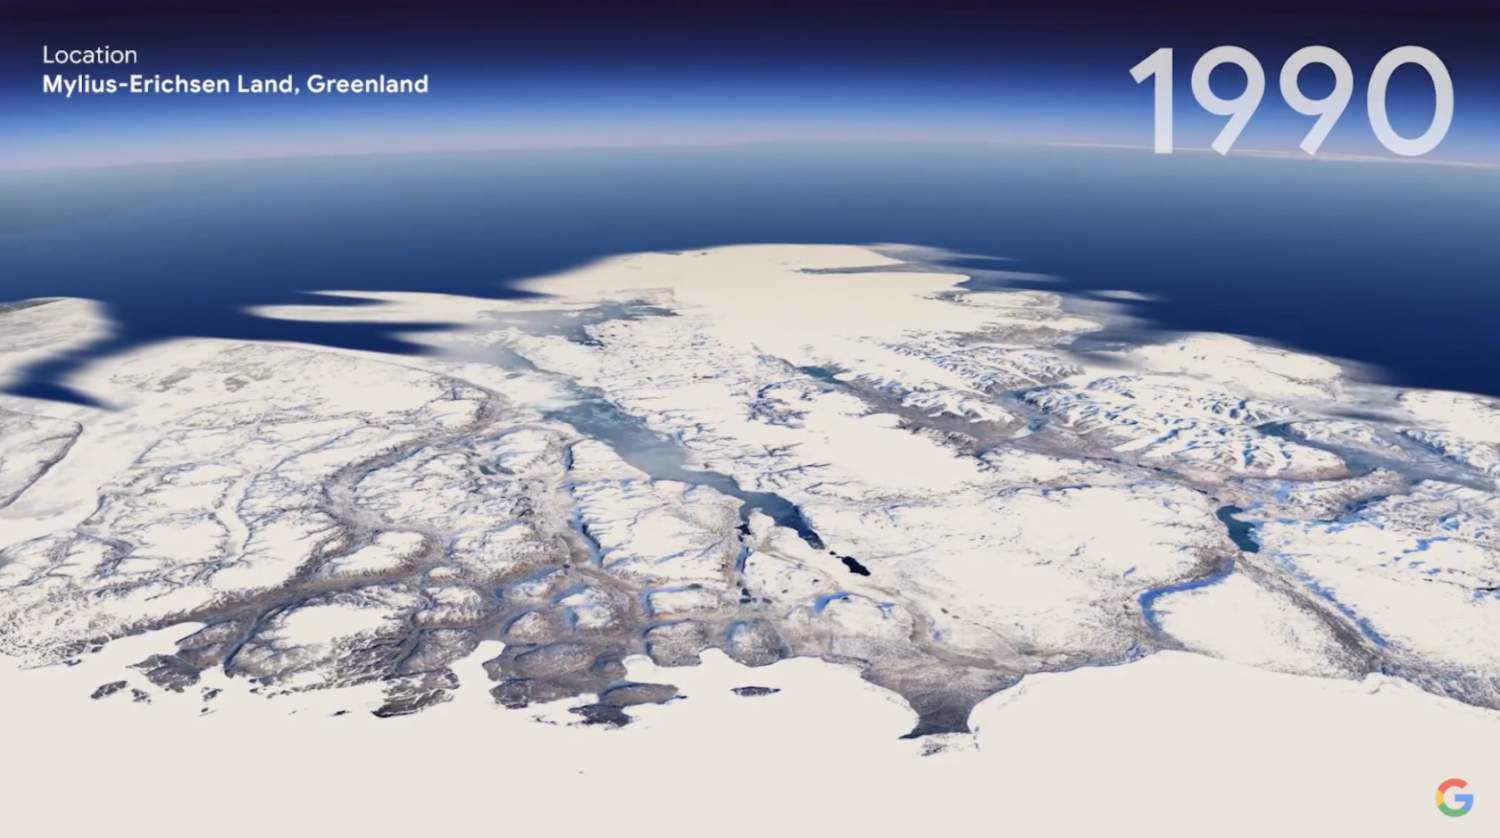 epic-google-earth-update-adds-nearly-4-decades-of-global-timelapse-video